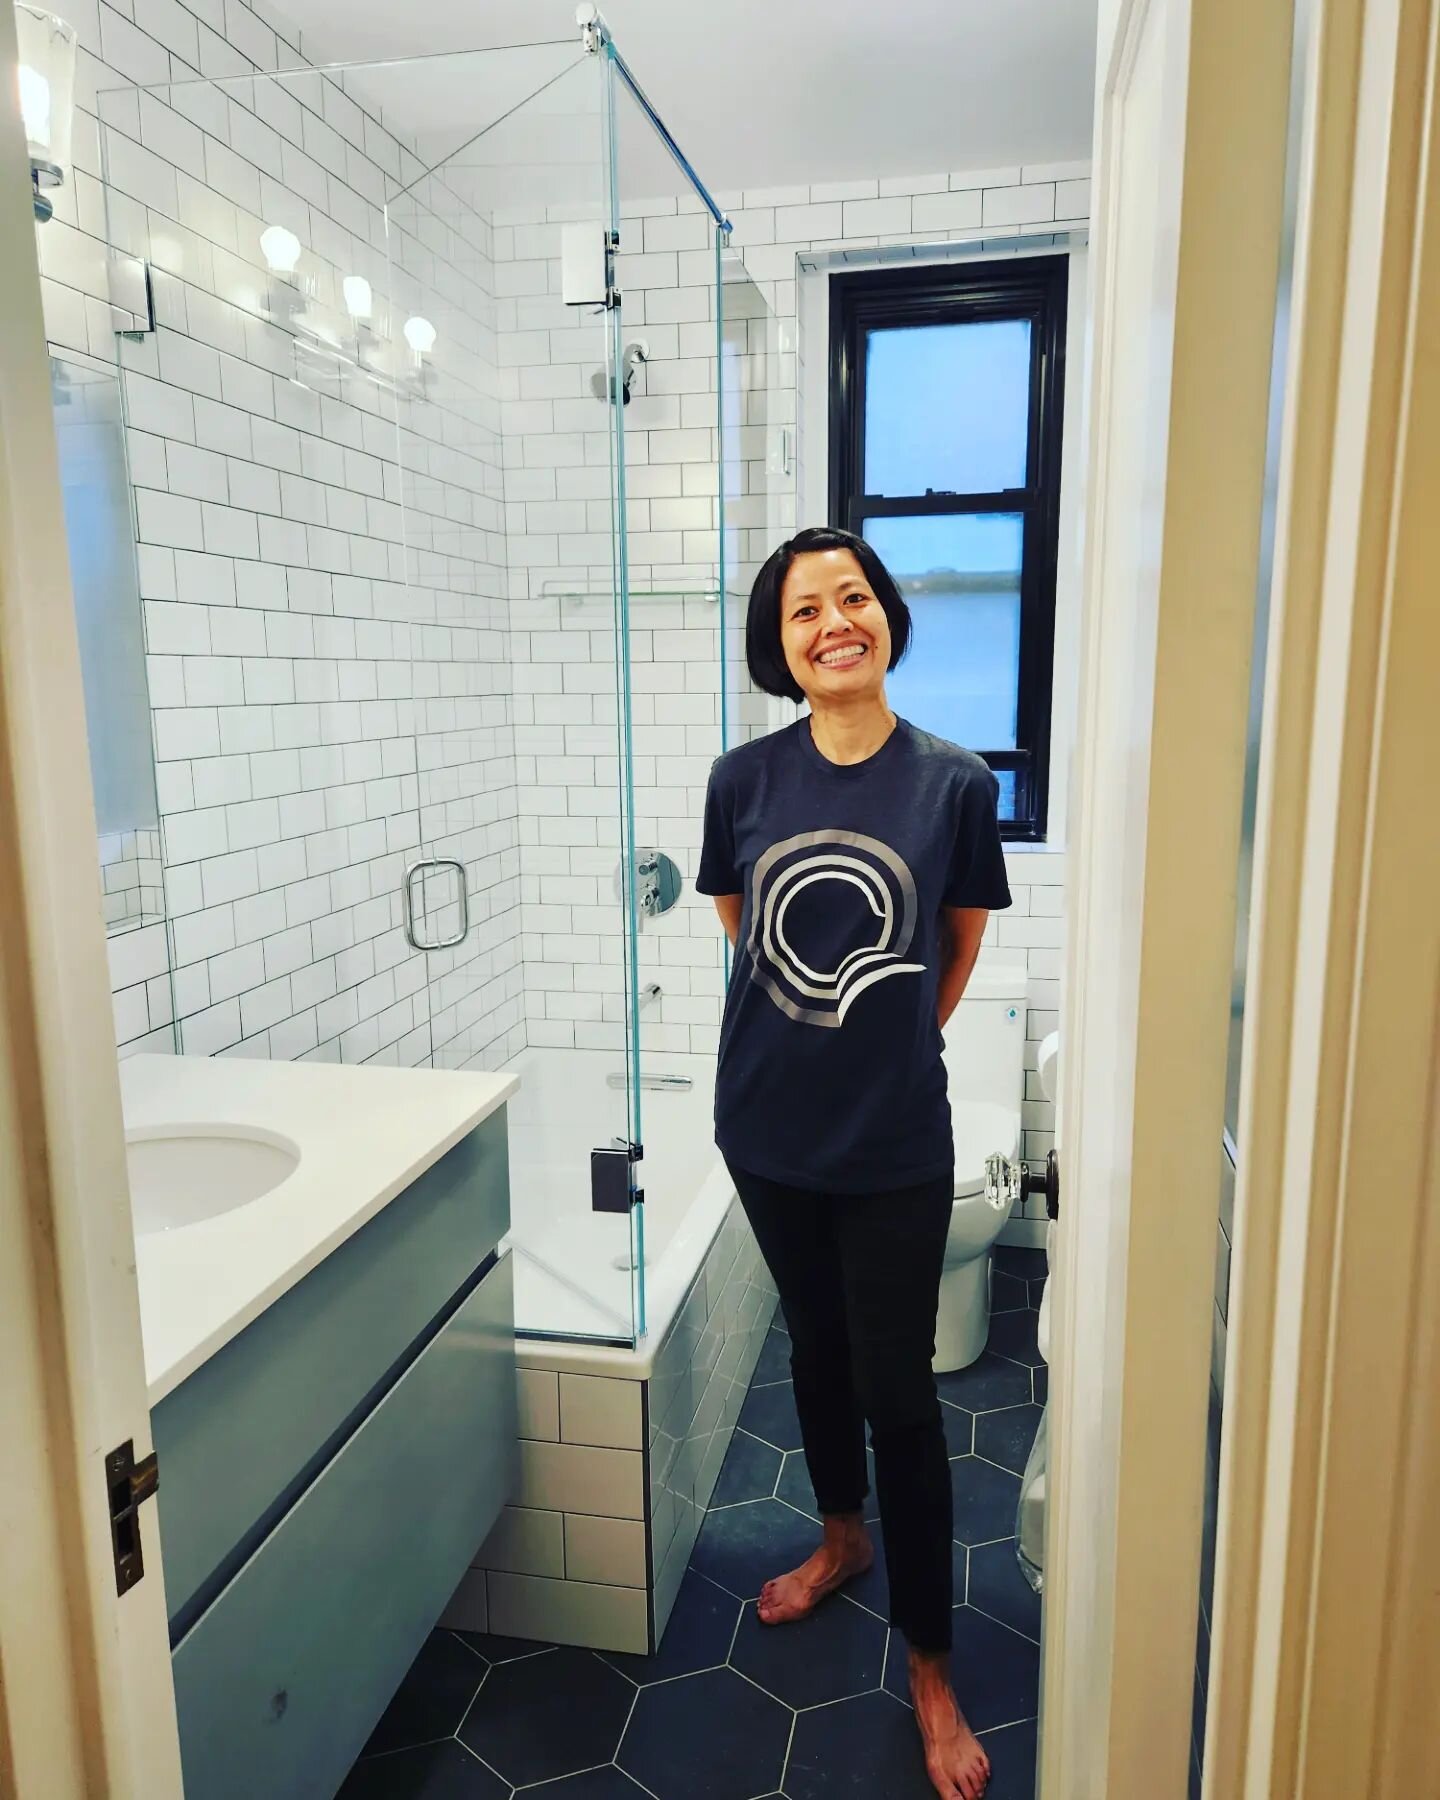 Client&rsquo;s bathroom is COMPLETED!!&nbsp; So happy how it turned out; clean and minimal but adding some bright modern finishes. I love their custom vanity with lots of beautiful counter space! My lovely clients are so tickled they&rsquo;re posing 